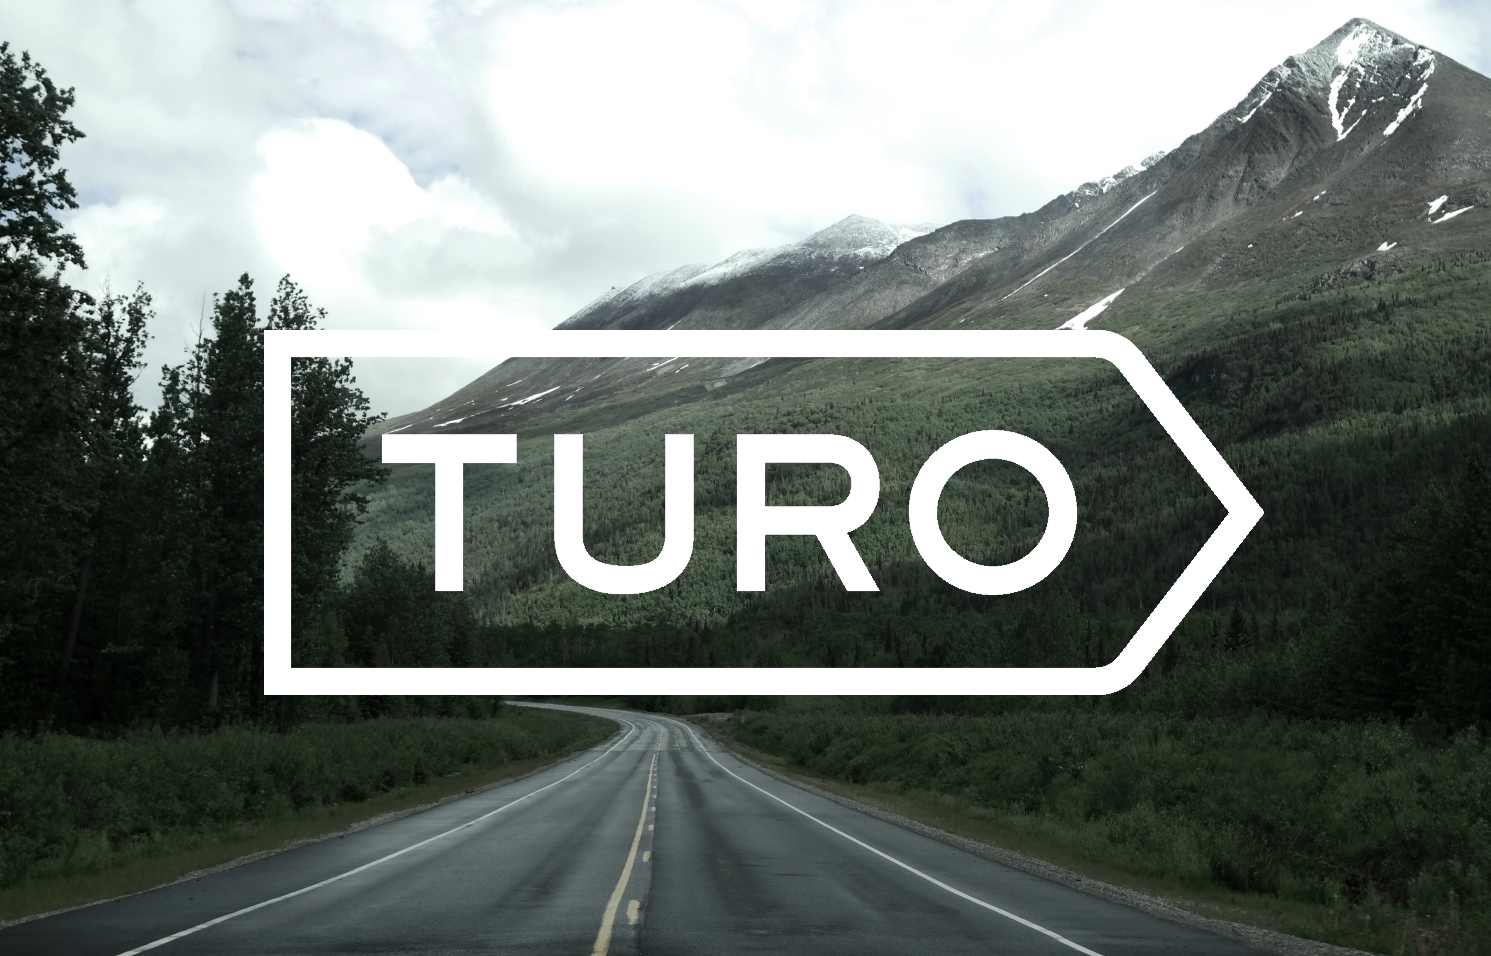 Turo: Renting Your Personal Vehicle